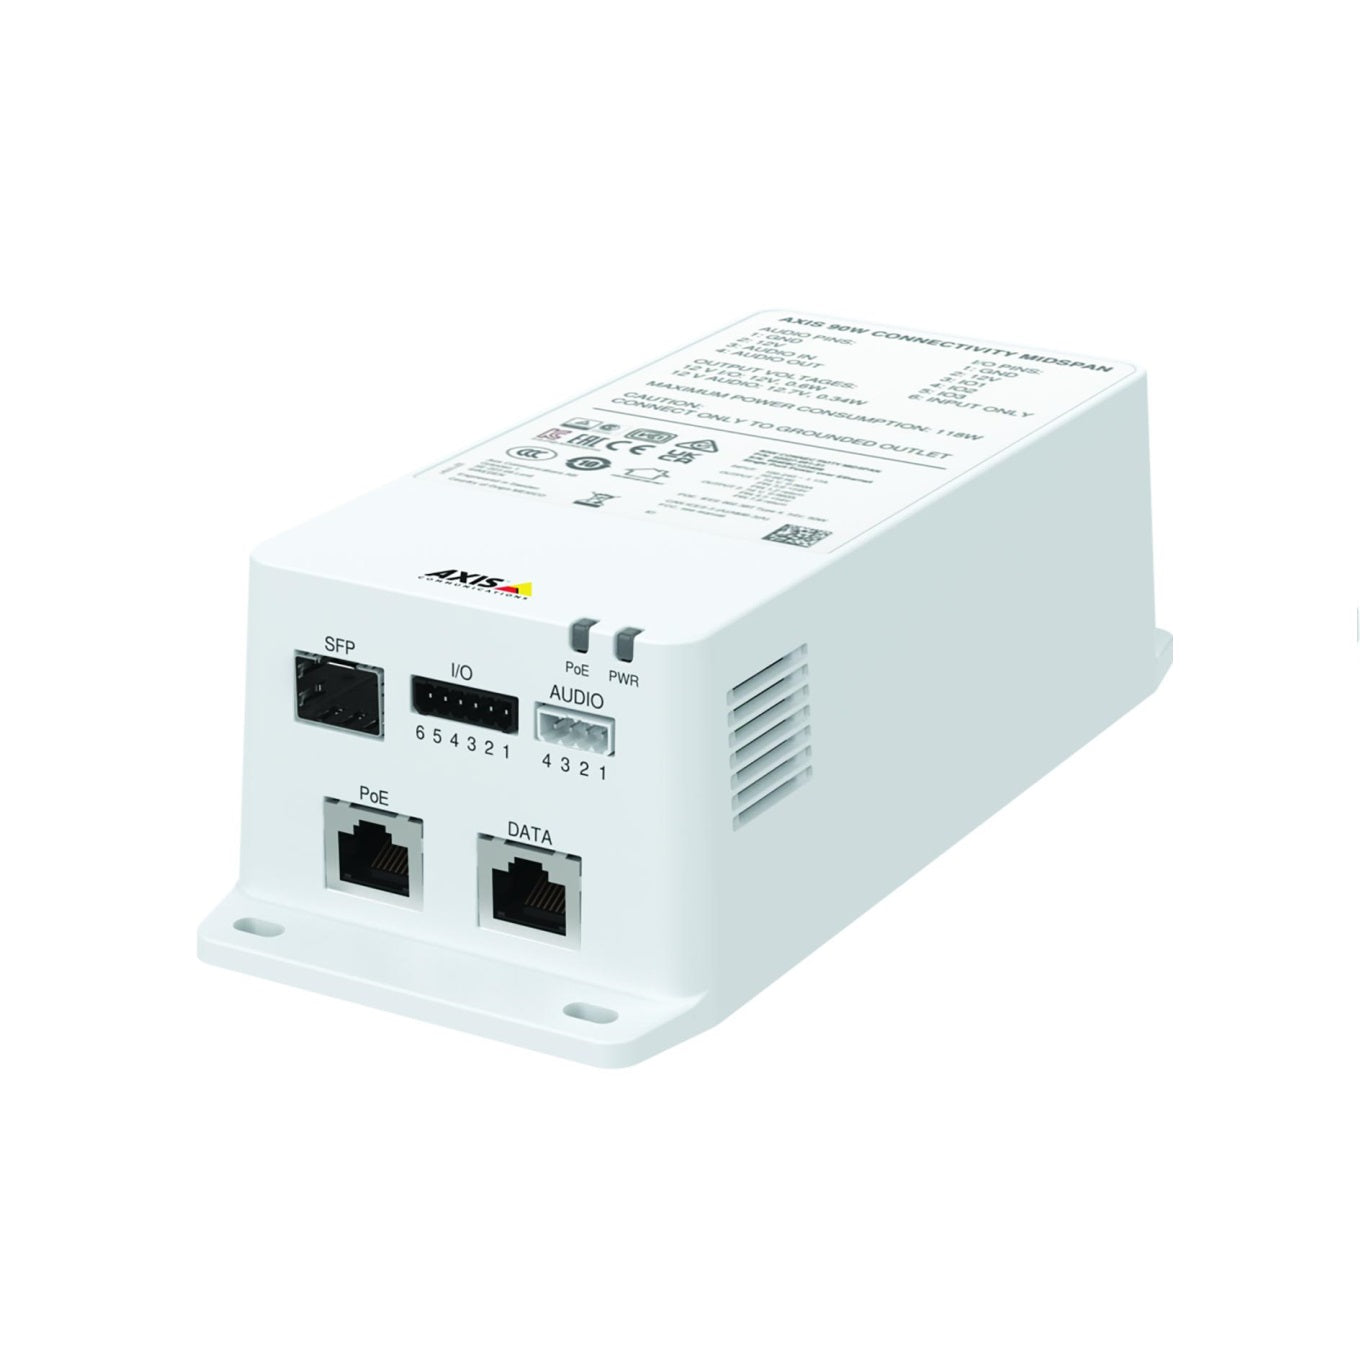 AXIS TU8003 90 W Connectivity Midspan with portcast technology uses the cameras IP address to provide seemingly camera-integrated audio and I/O connectivity.